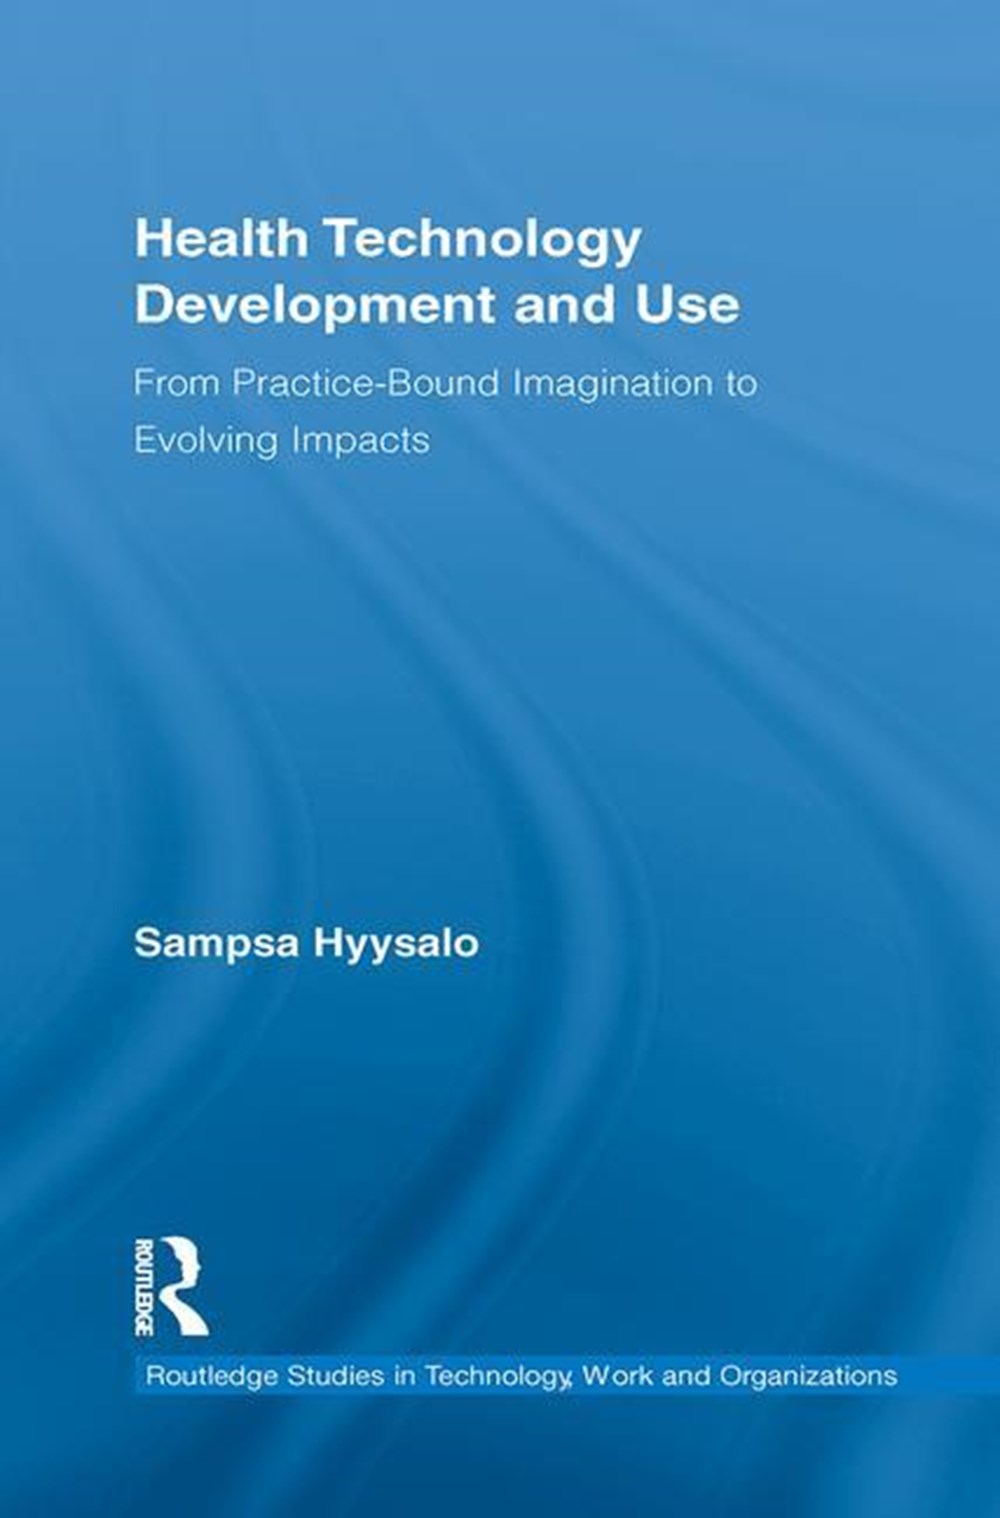 Health Technology Development and Use: From Practice-Bound Imagination to Evolving Impacts